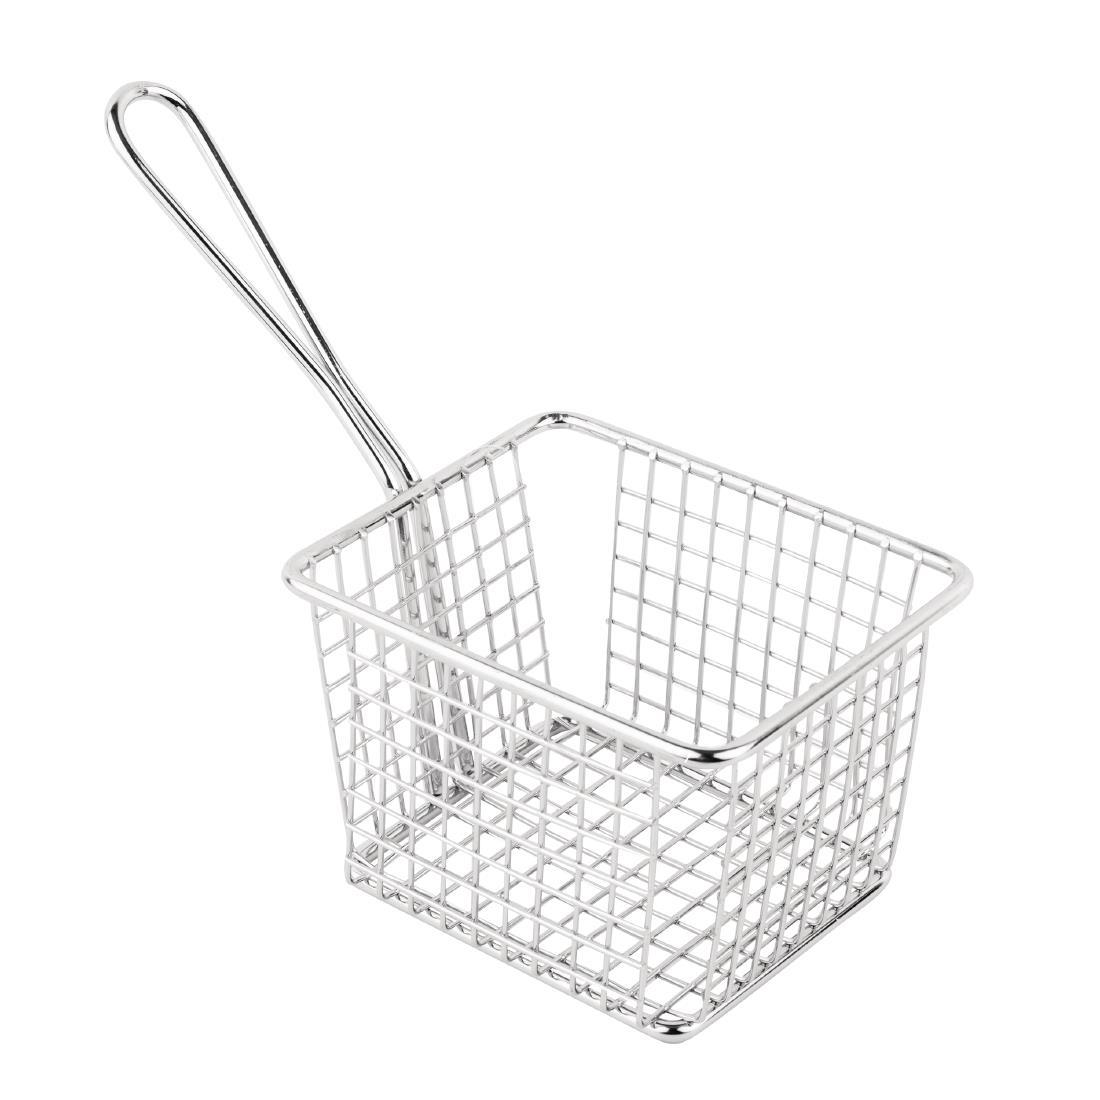 Olympia Chip basket Square with handle Large - GG867  - 3